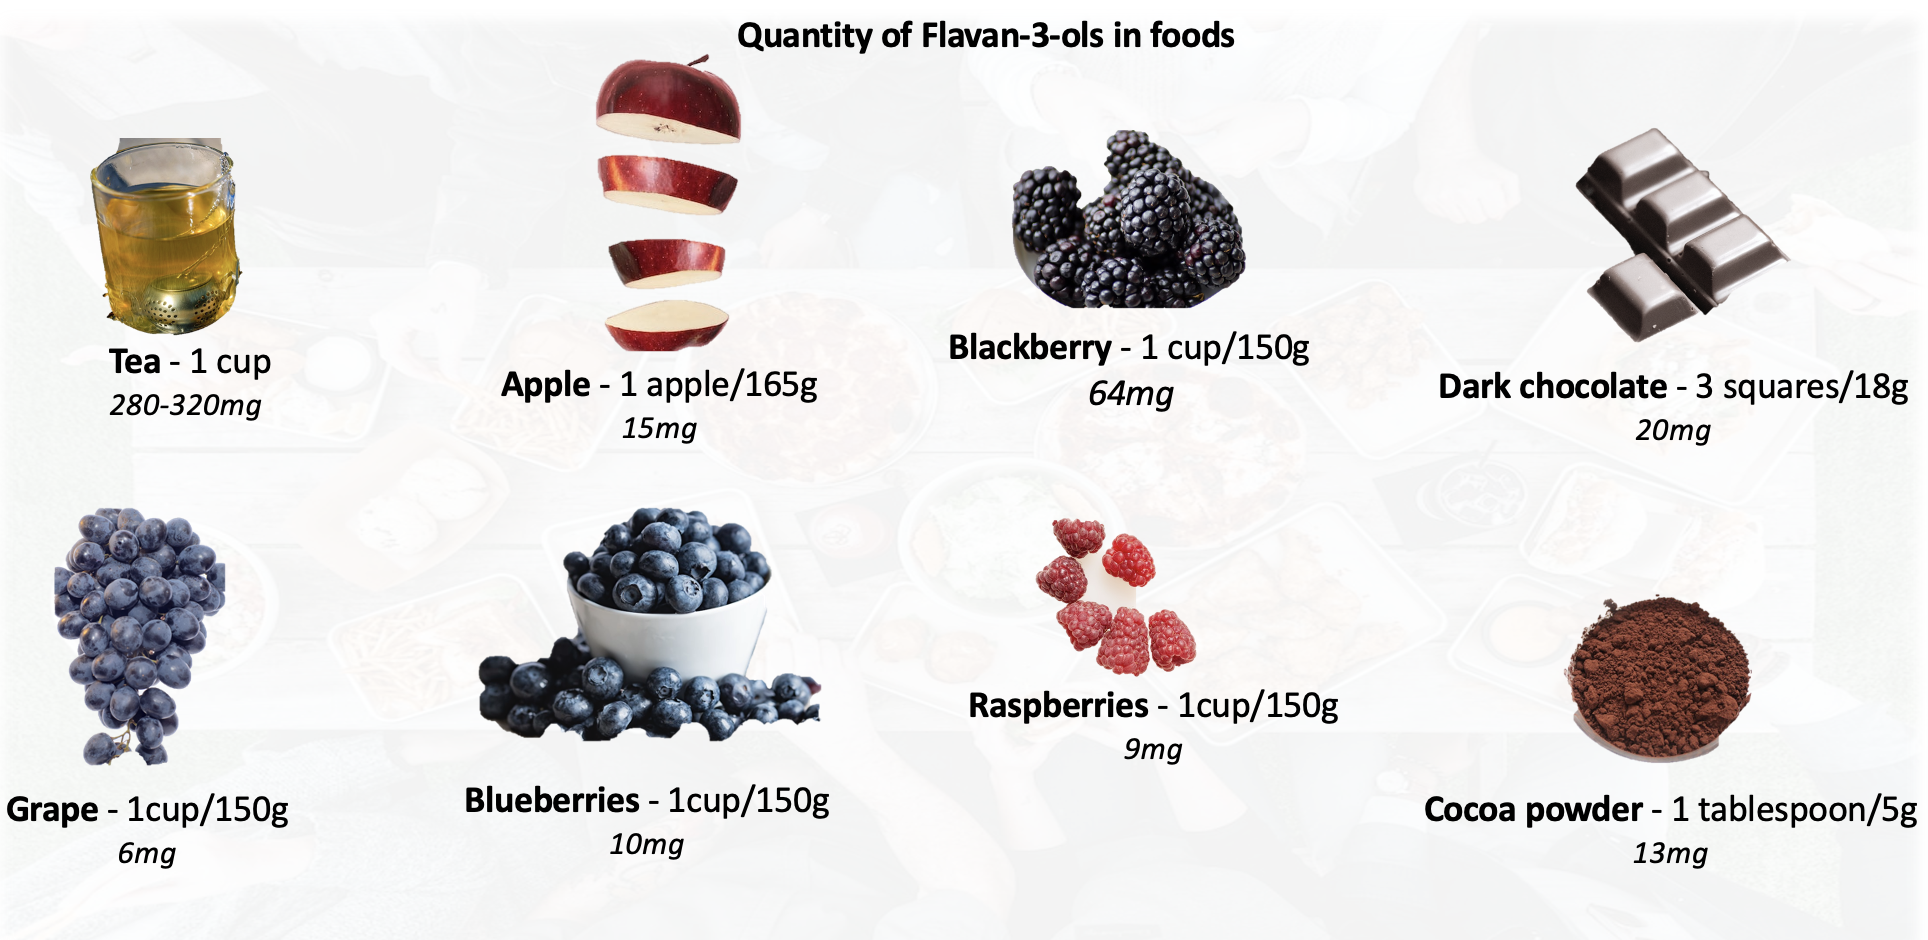 Image of different foods with their quantitiy of flavan-3-ols